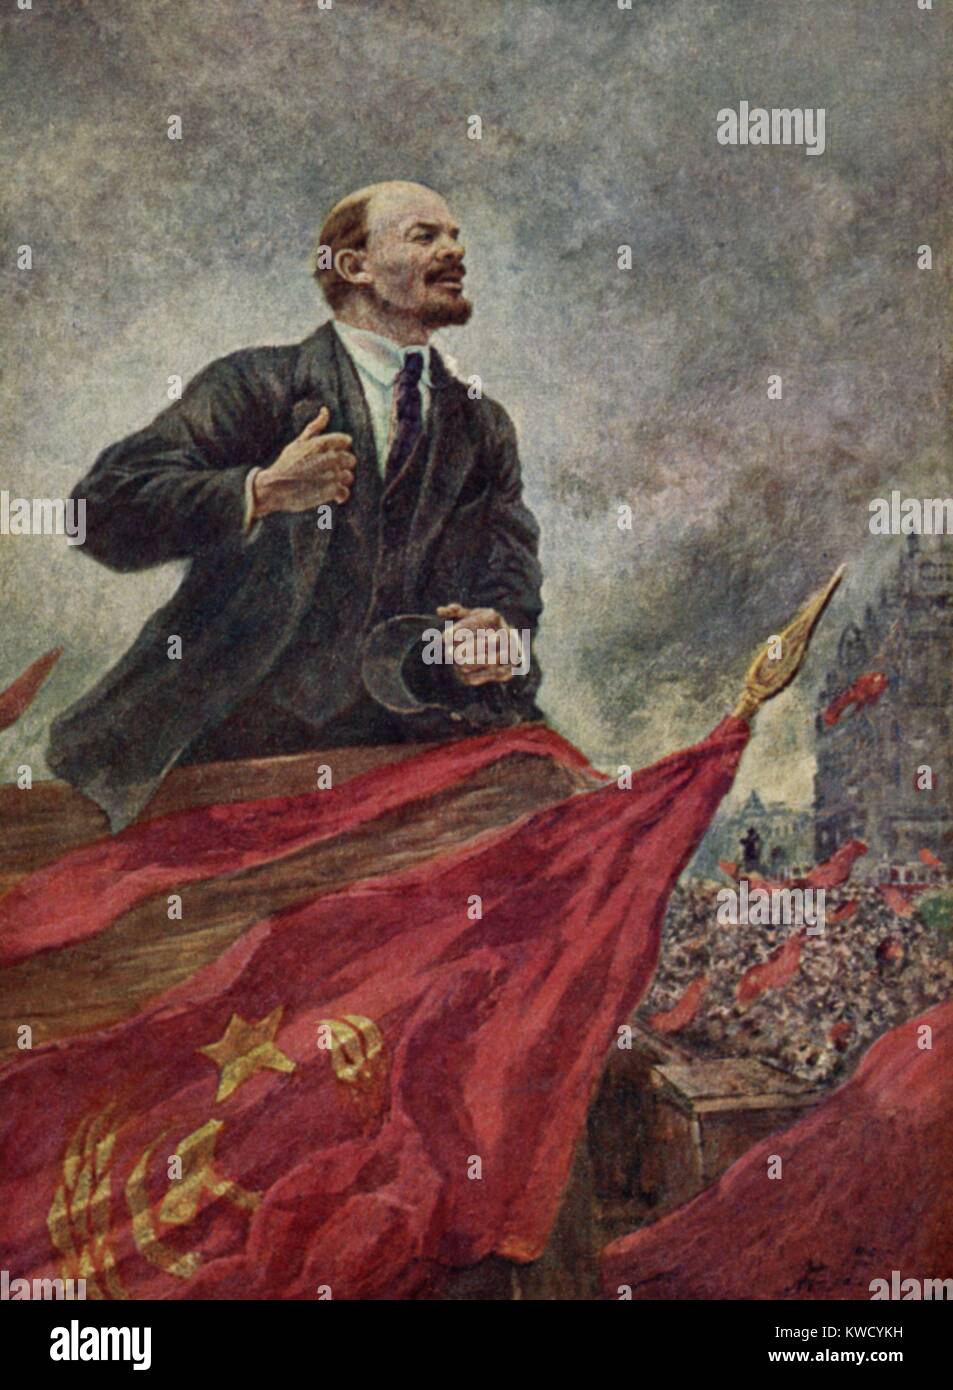 LENIN ON THE STAND, by Alexander Gerassimov, c. 1925-1940. Social-Realist painting of Lenin speaking. Gerassimov was among the most prominent and politically connected painters in mid-century Soviet Russia (BSLOC 2017 2 20) Stock Photo